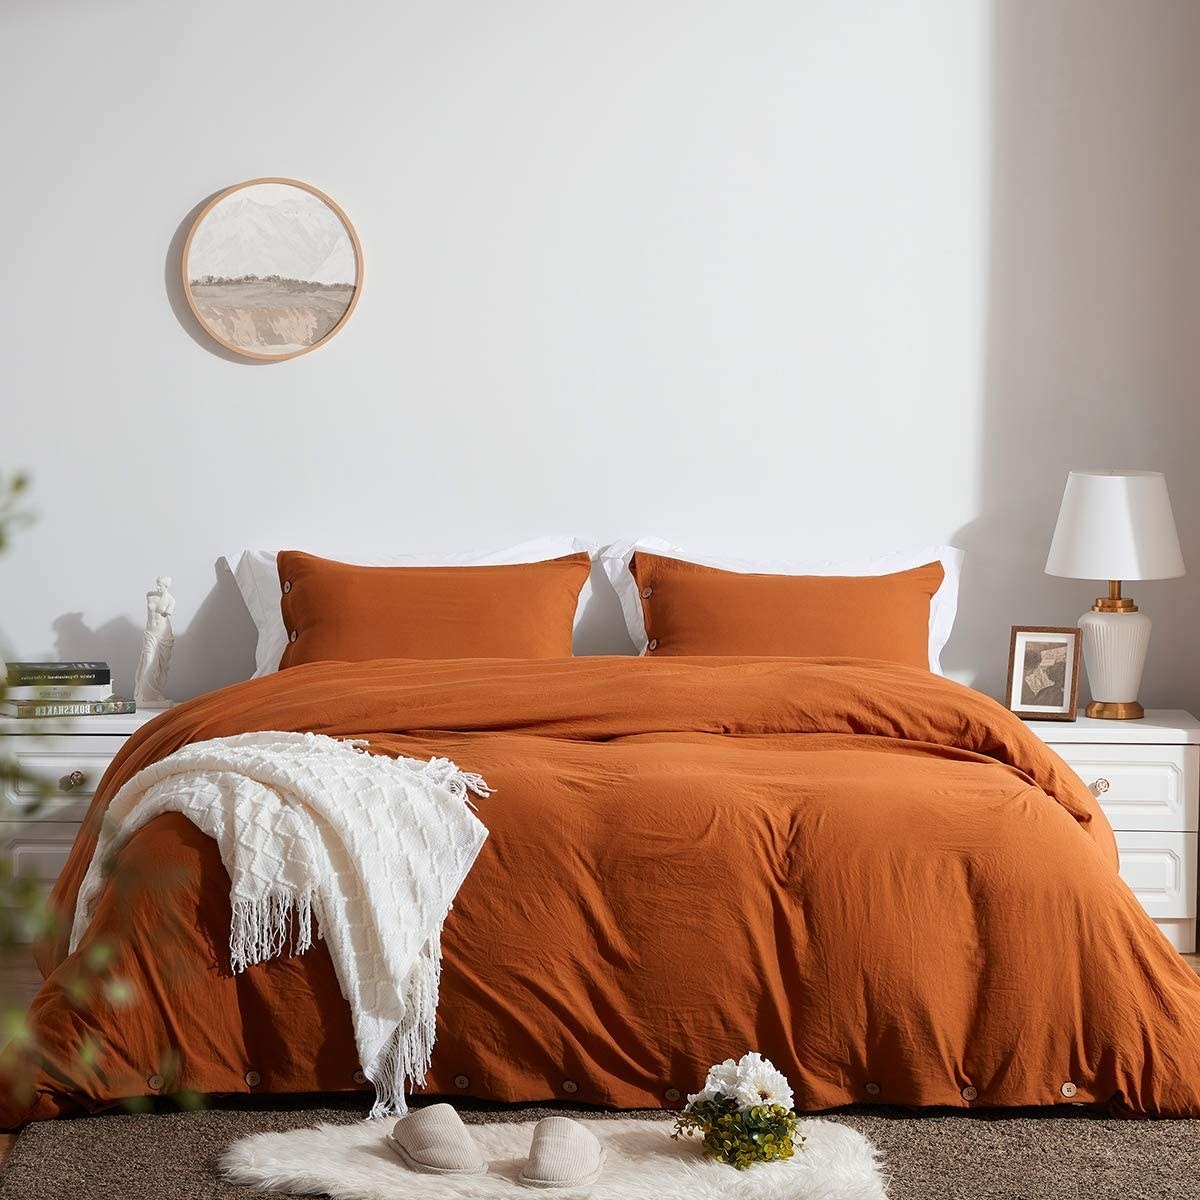 the orange duvet cover on a bed with a white throw on top